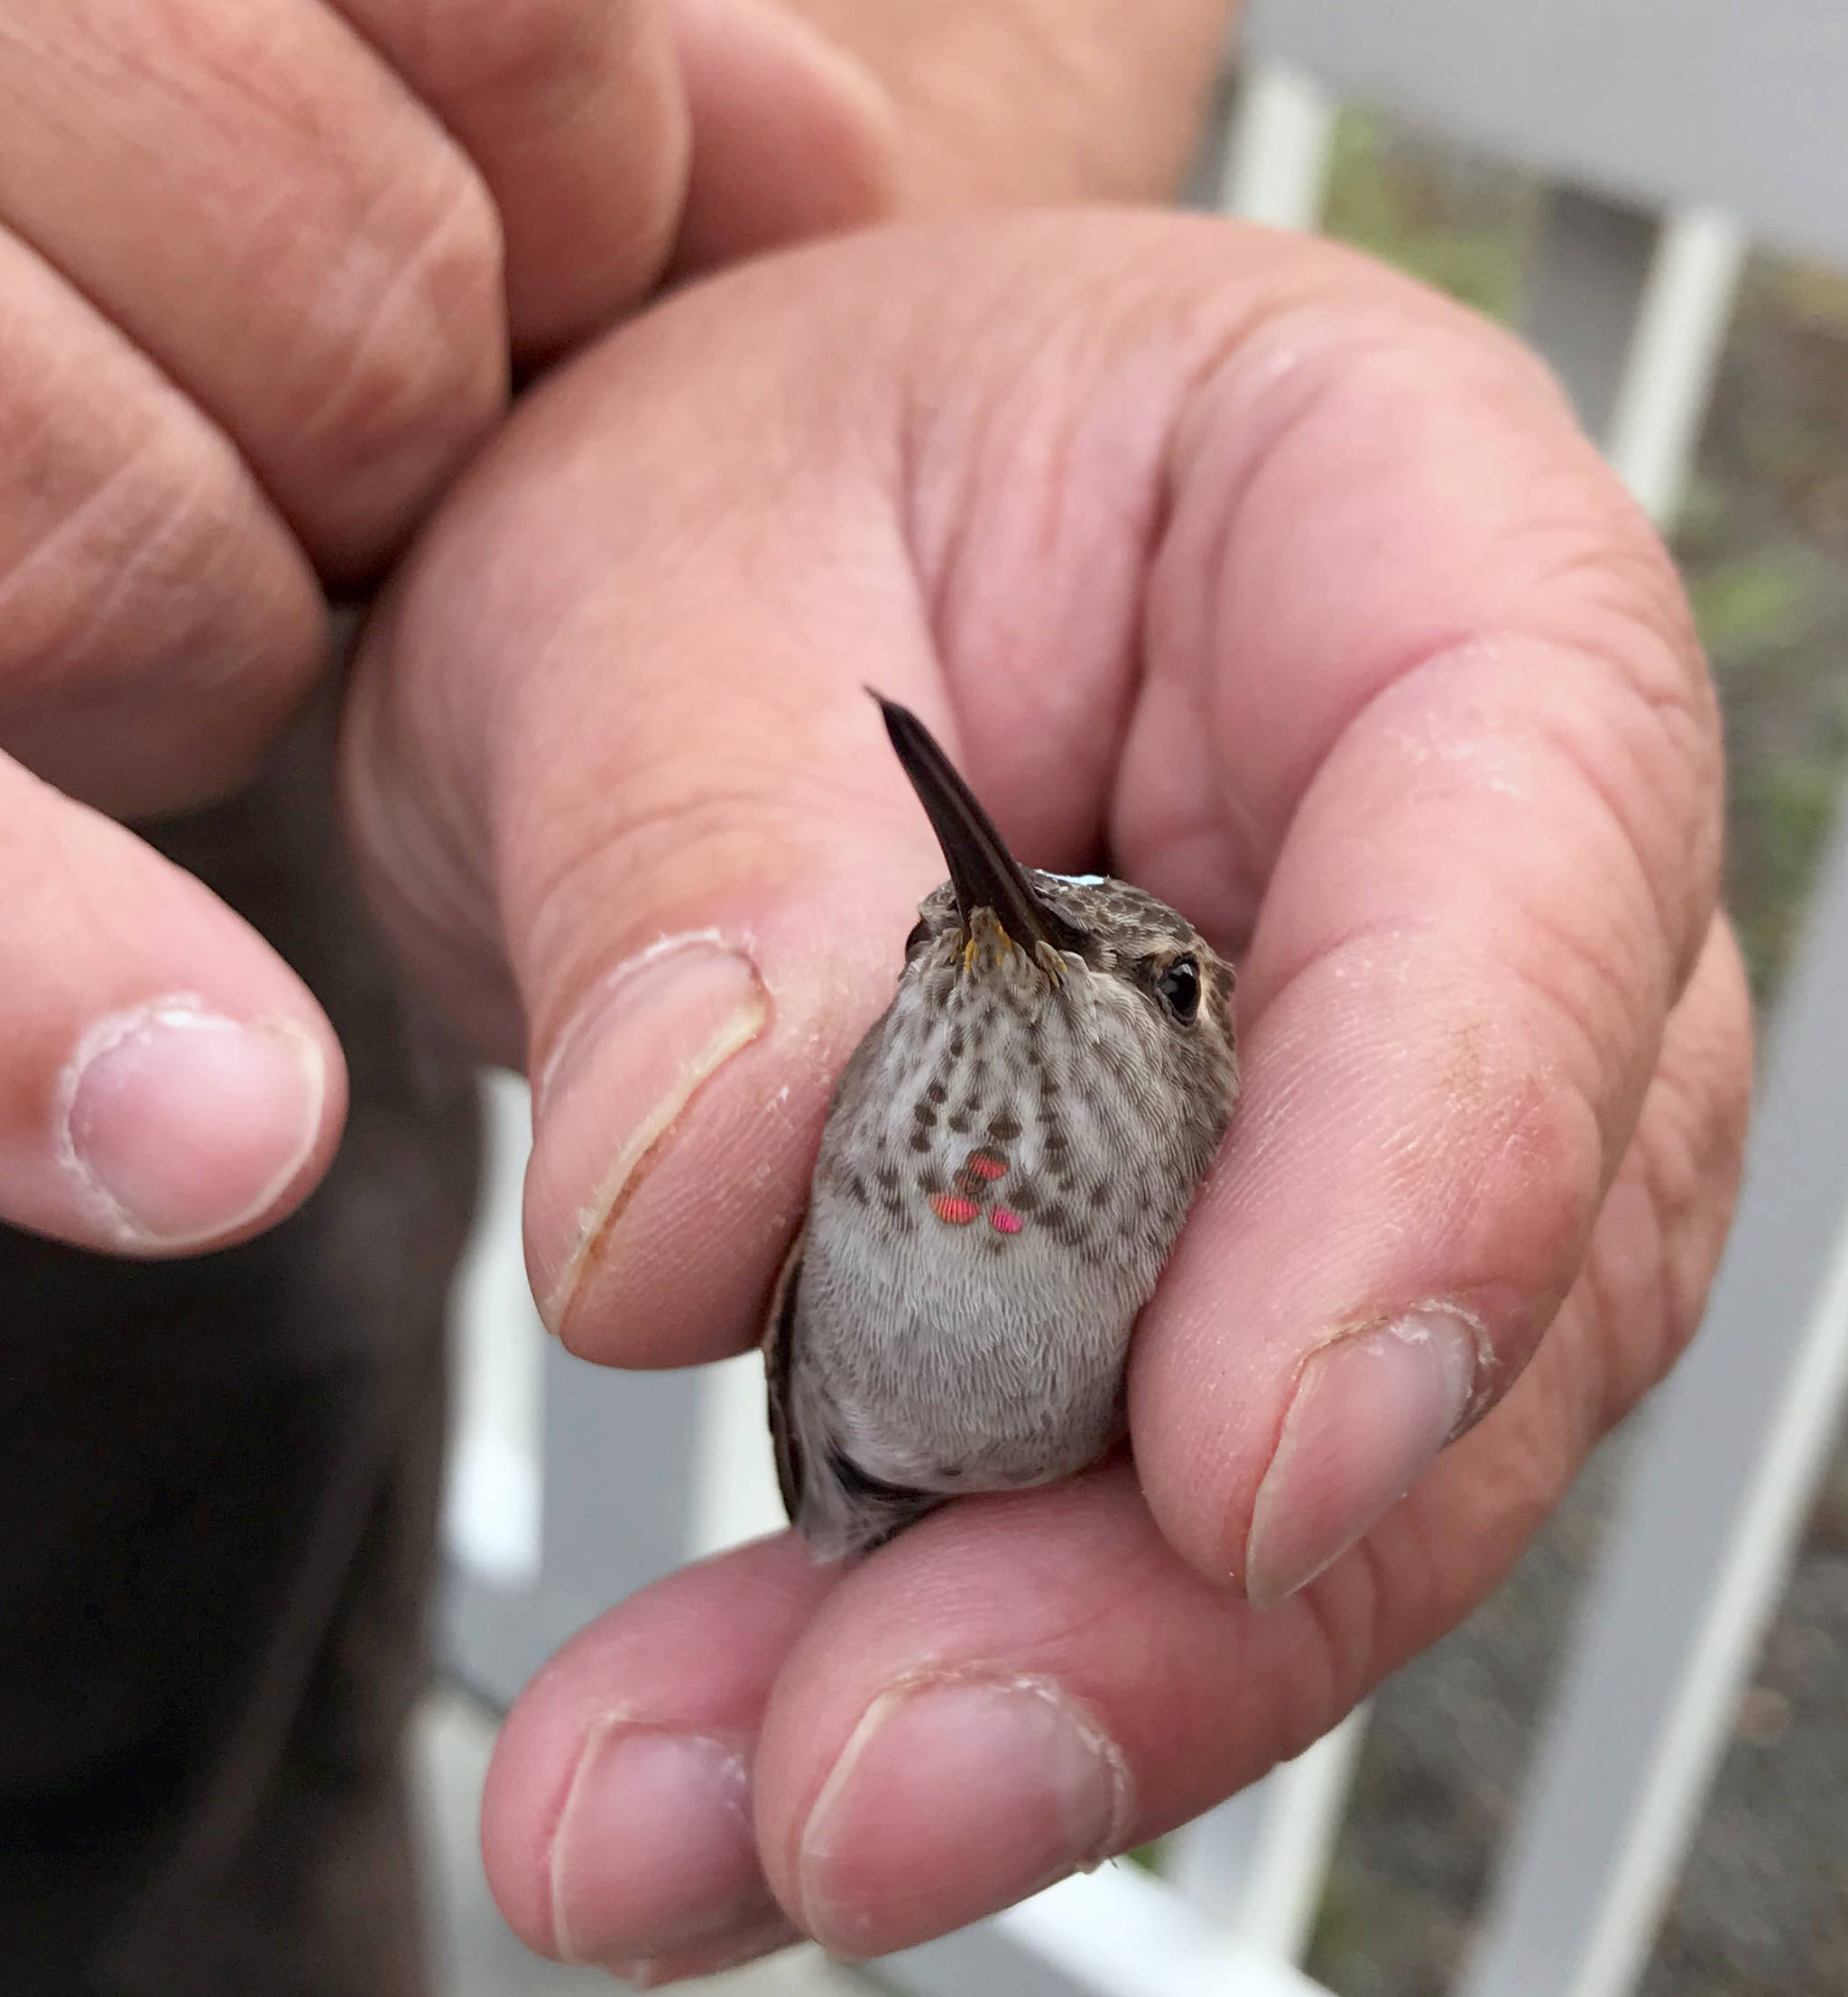 An adult female Anna’s hummingbird, fitted with a new band, is set for release. Females will also get some gorget feathers, but not as prominent as males. (Photo provided by Breanna Bloom)